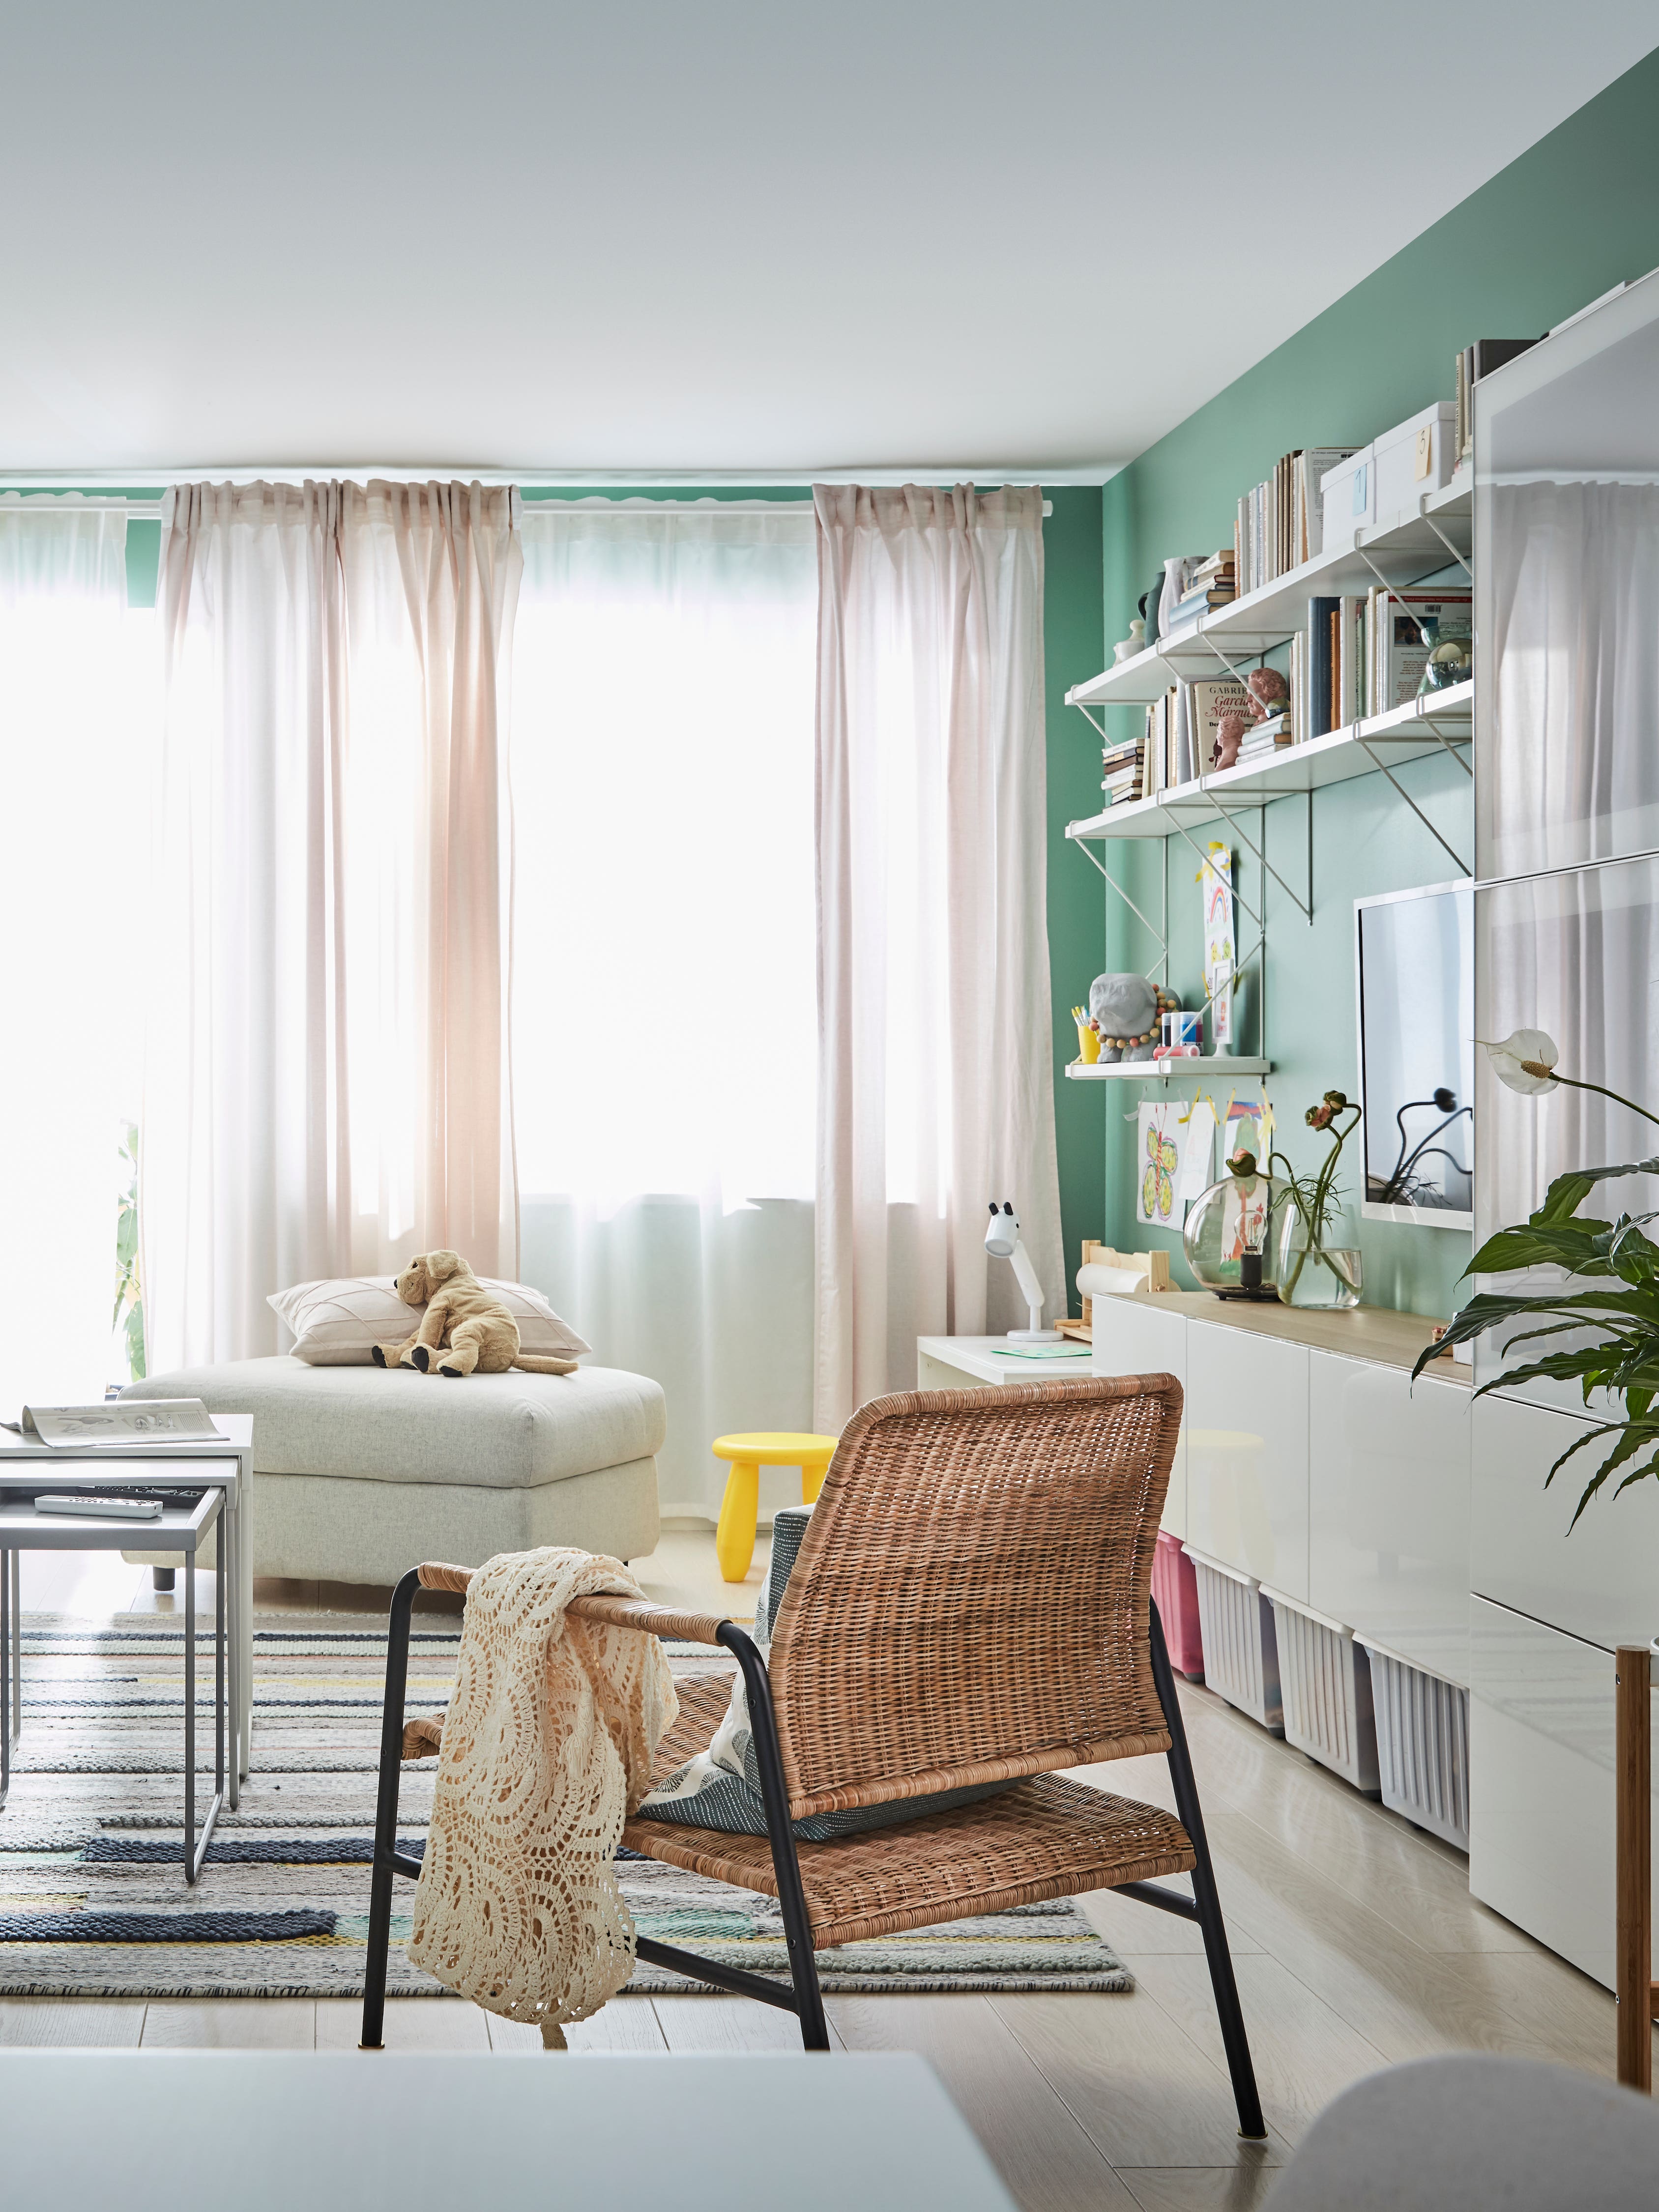 1 Space, 5 Ways: What the Perfect Living Room Looks Like Around the World